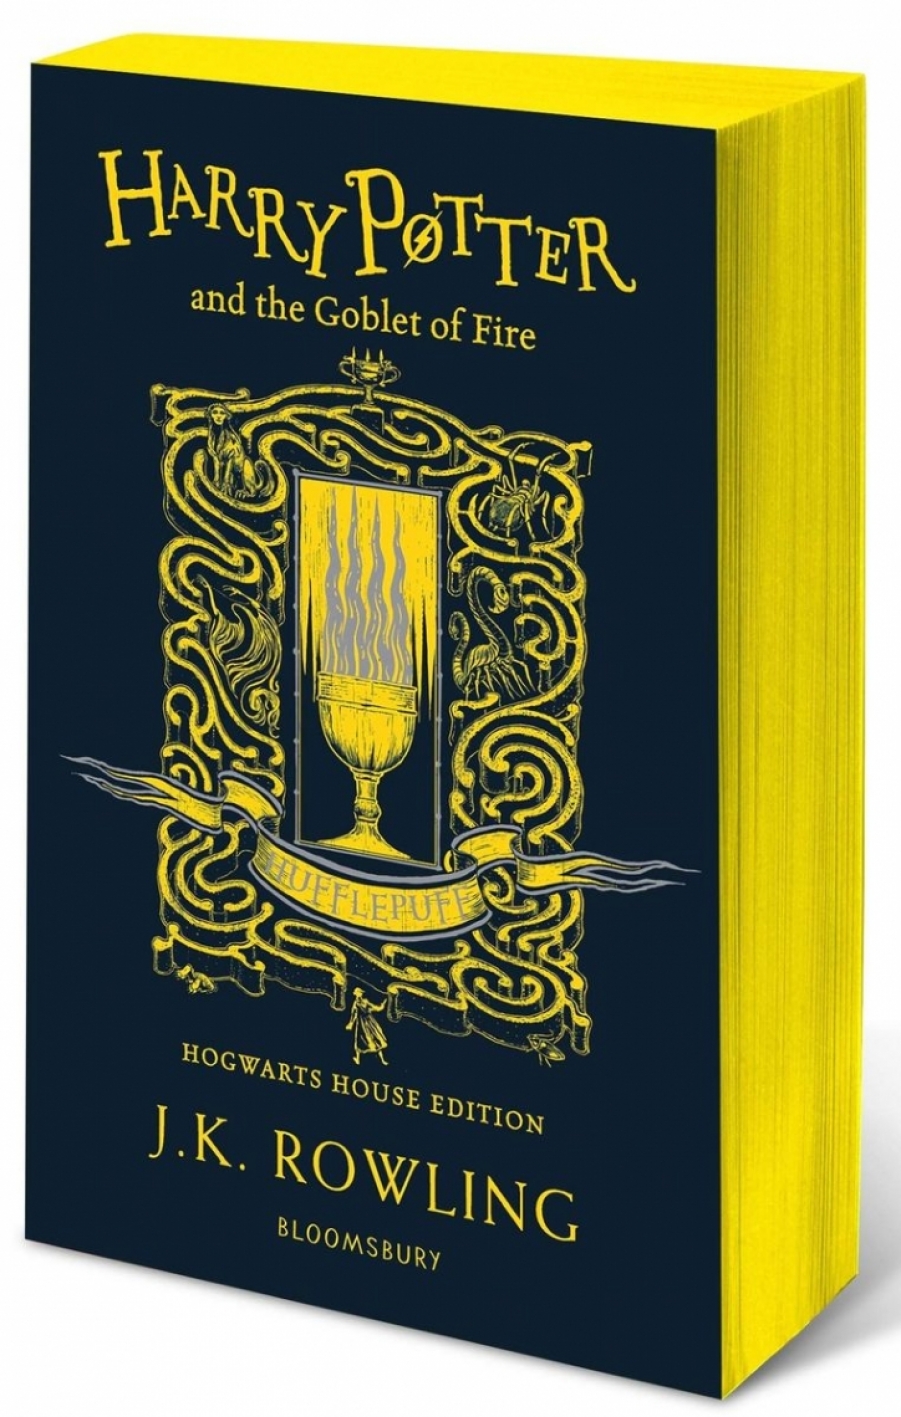 Rowling J.K. Harry Potter and the Goblet of Fire - Hufflepuff Edition 